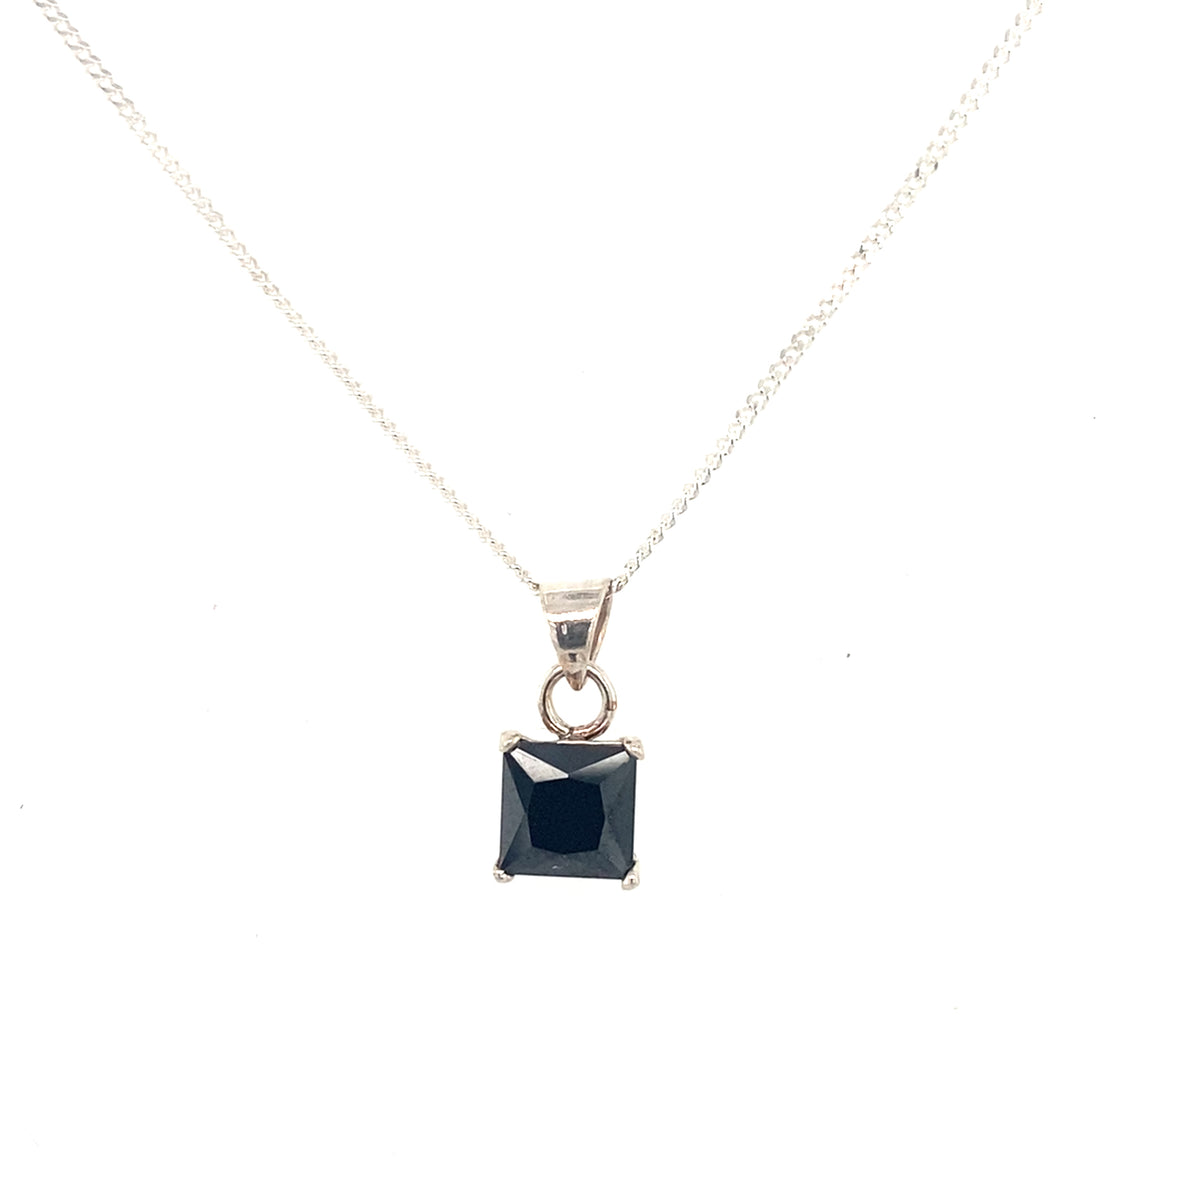 Sterling Silver Pendant with a Black Square Stone